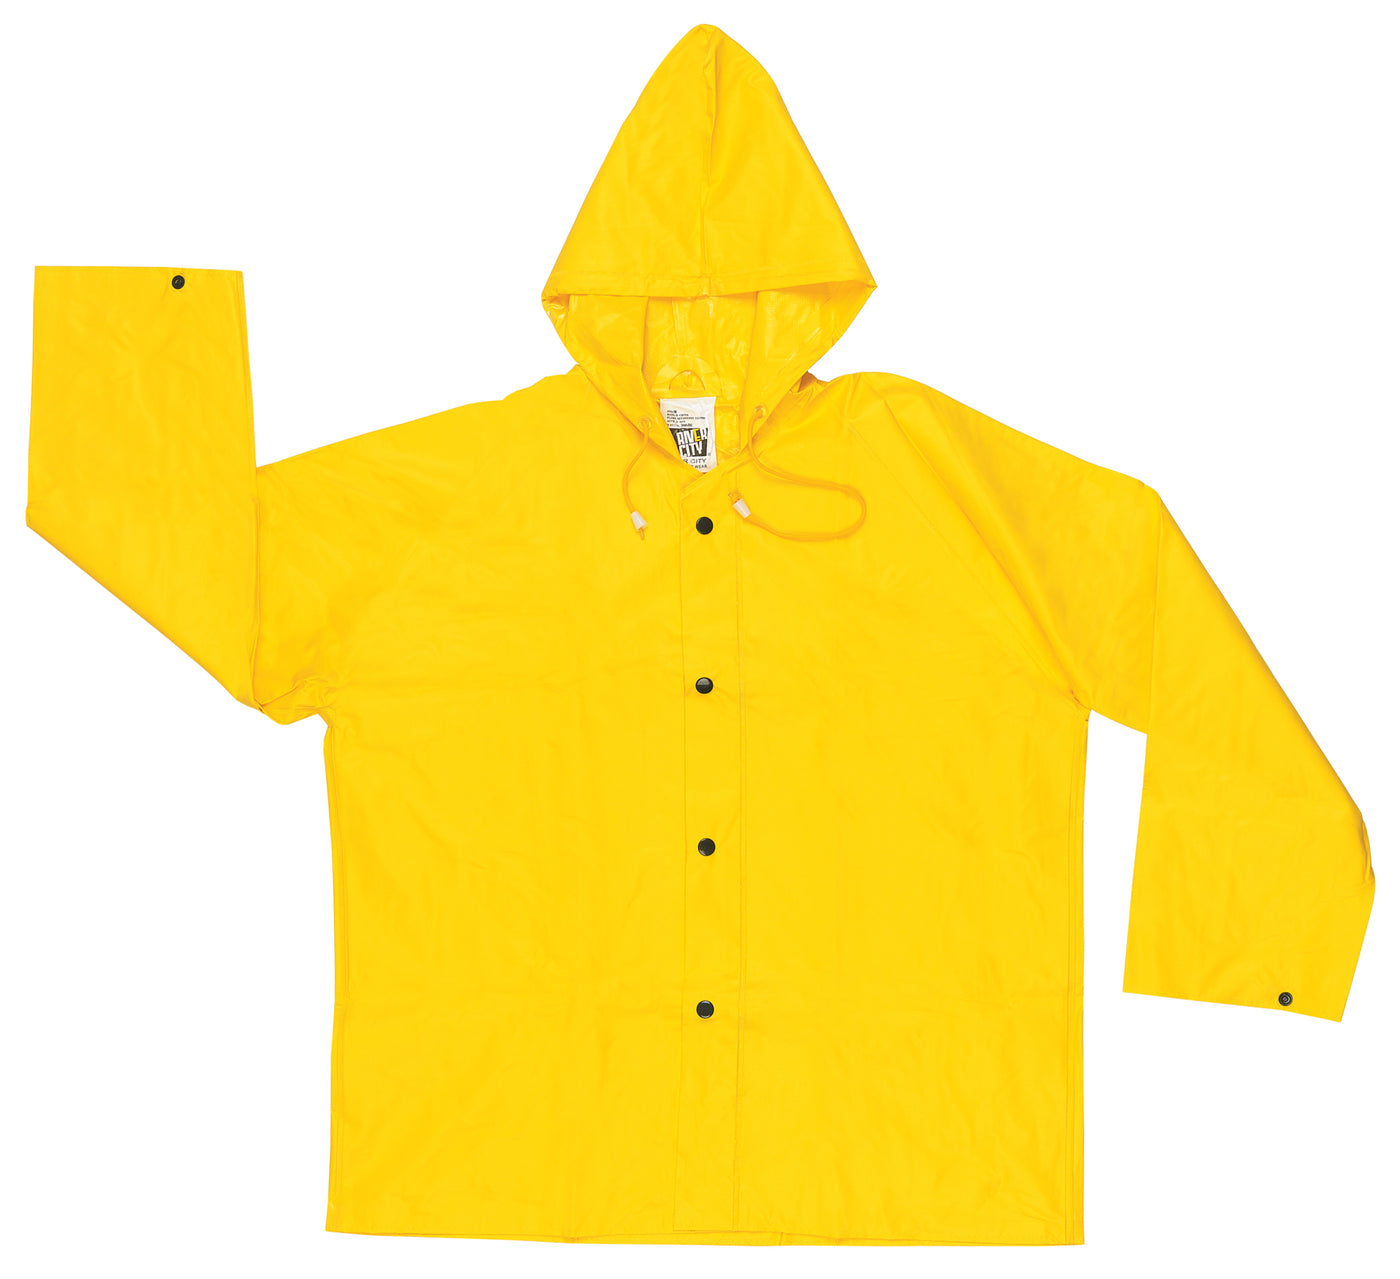 300JH - Wizard Jacket with Hood – MCR Safety's Buy & Try